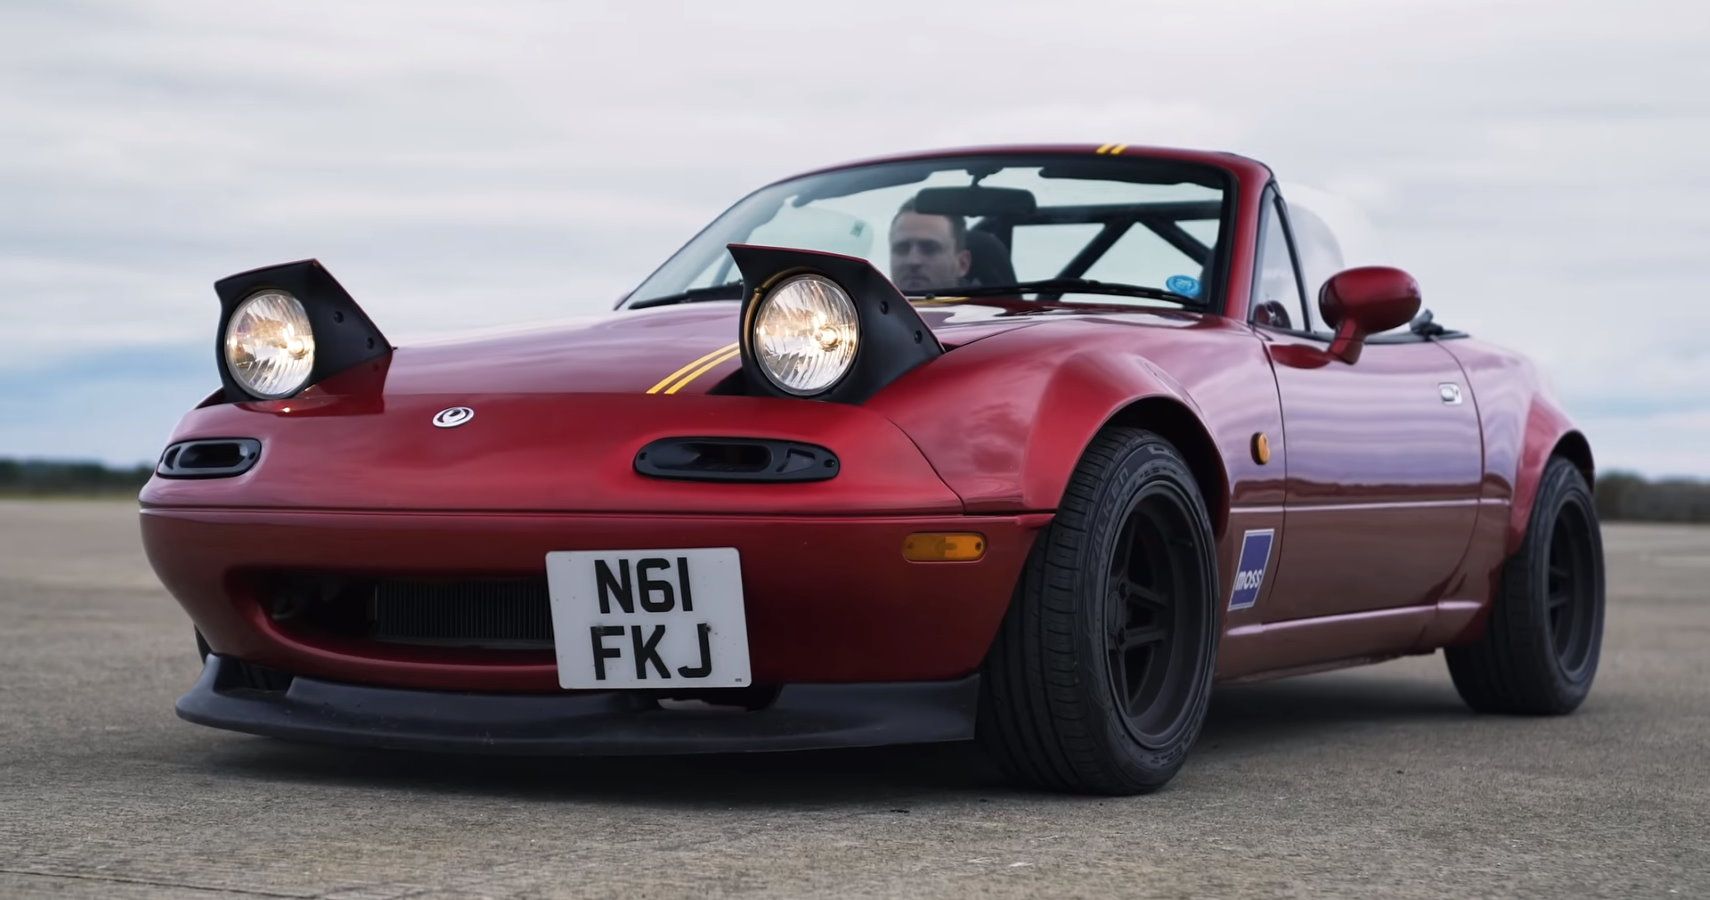 Supercharged Miata Takes On V6-Swapped MX-5 In Tiny Drag Race